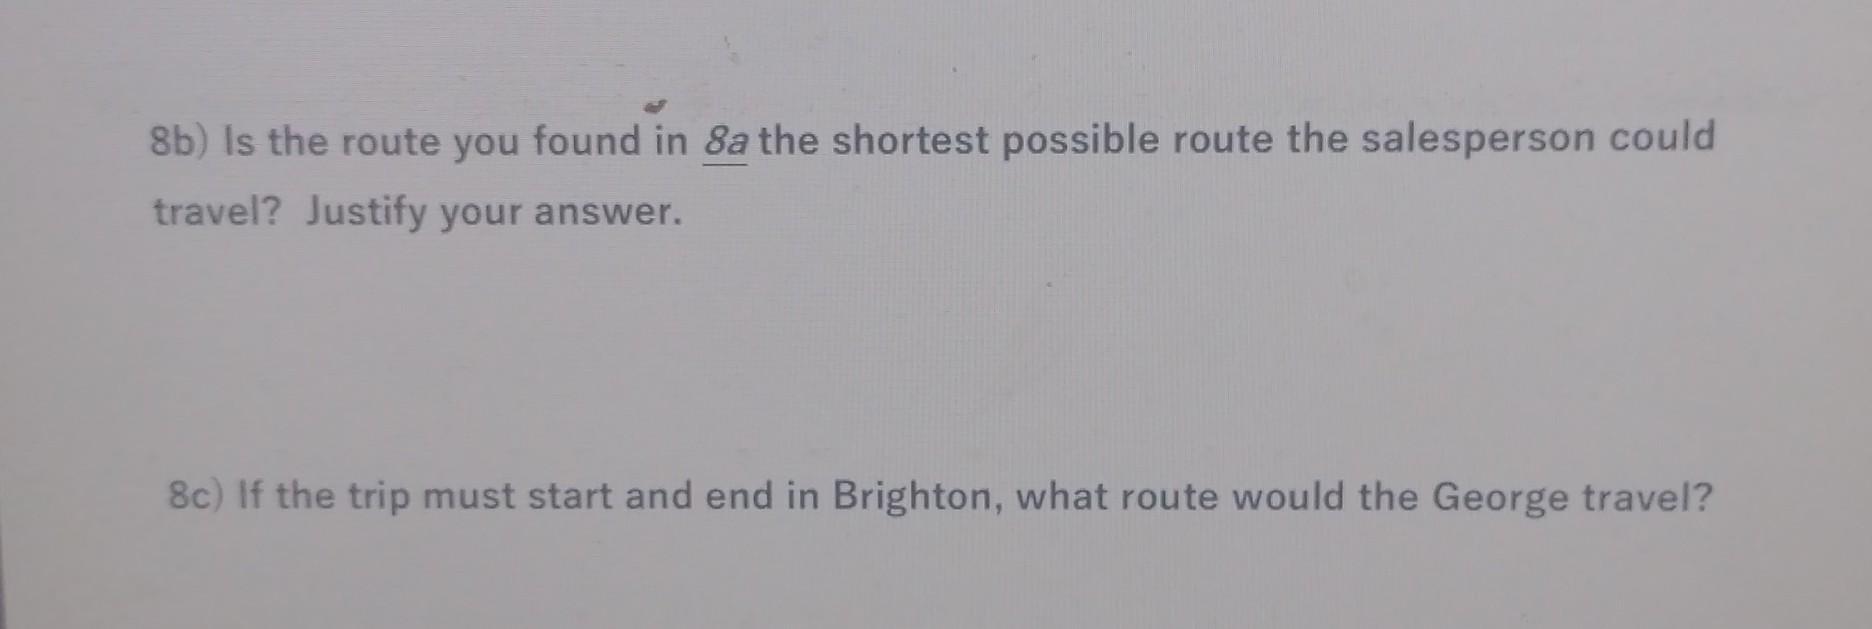 8b) Is the route you found in 8a the shortest possible route the salesperson could travel? Justify your